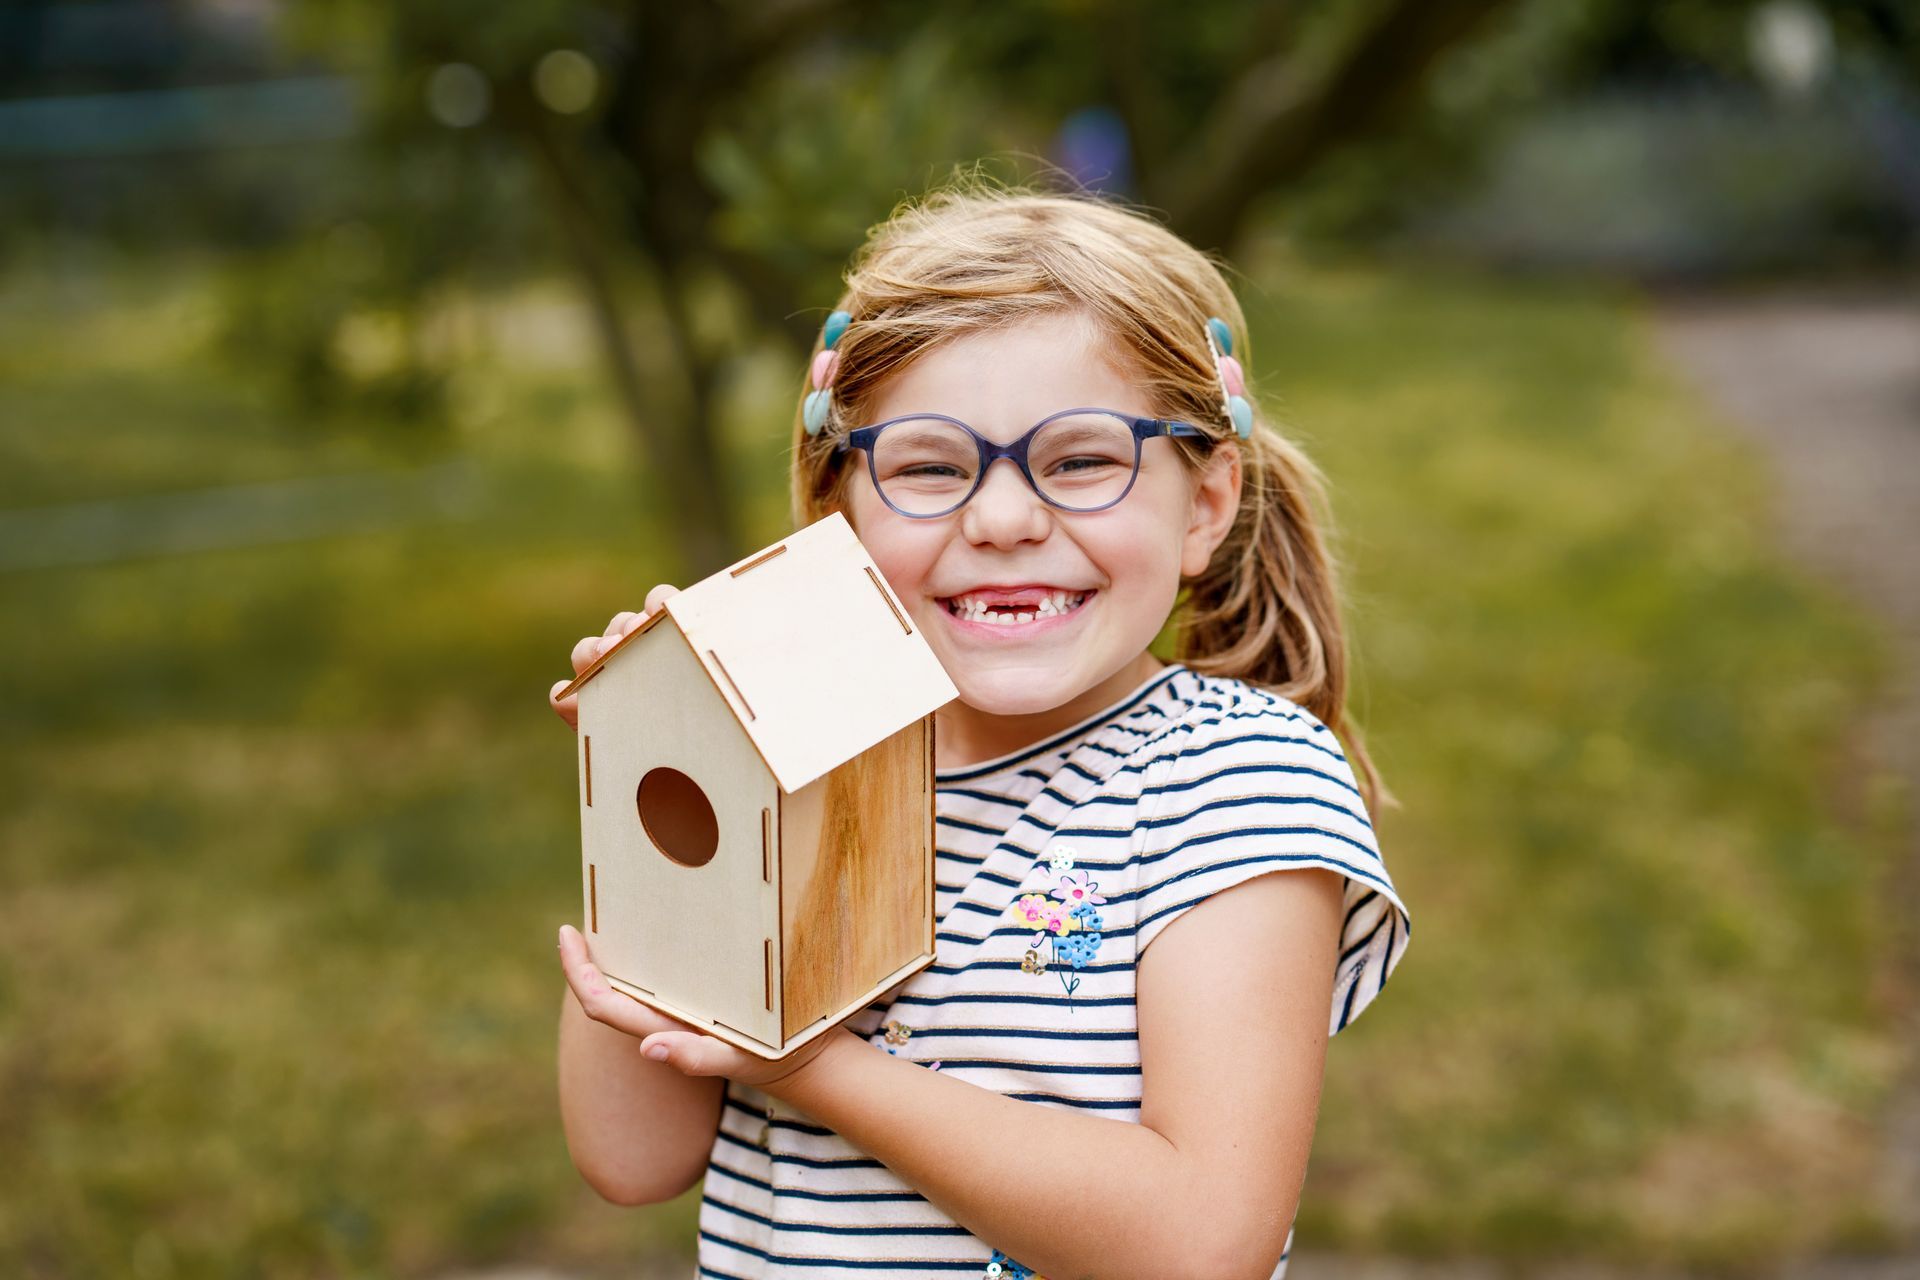 A little girl wearing glasses is holding a wooden birdhouse.